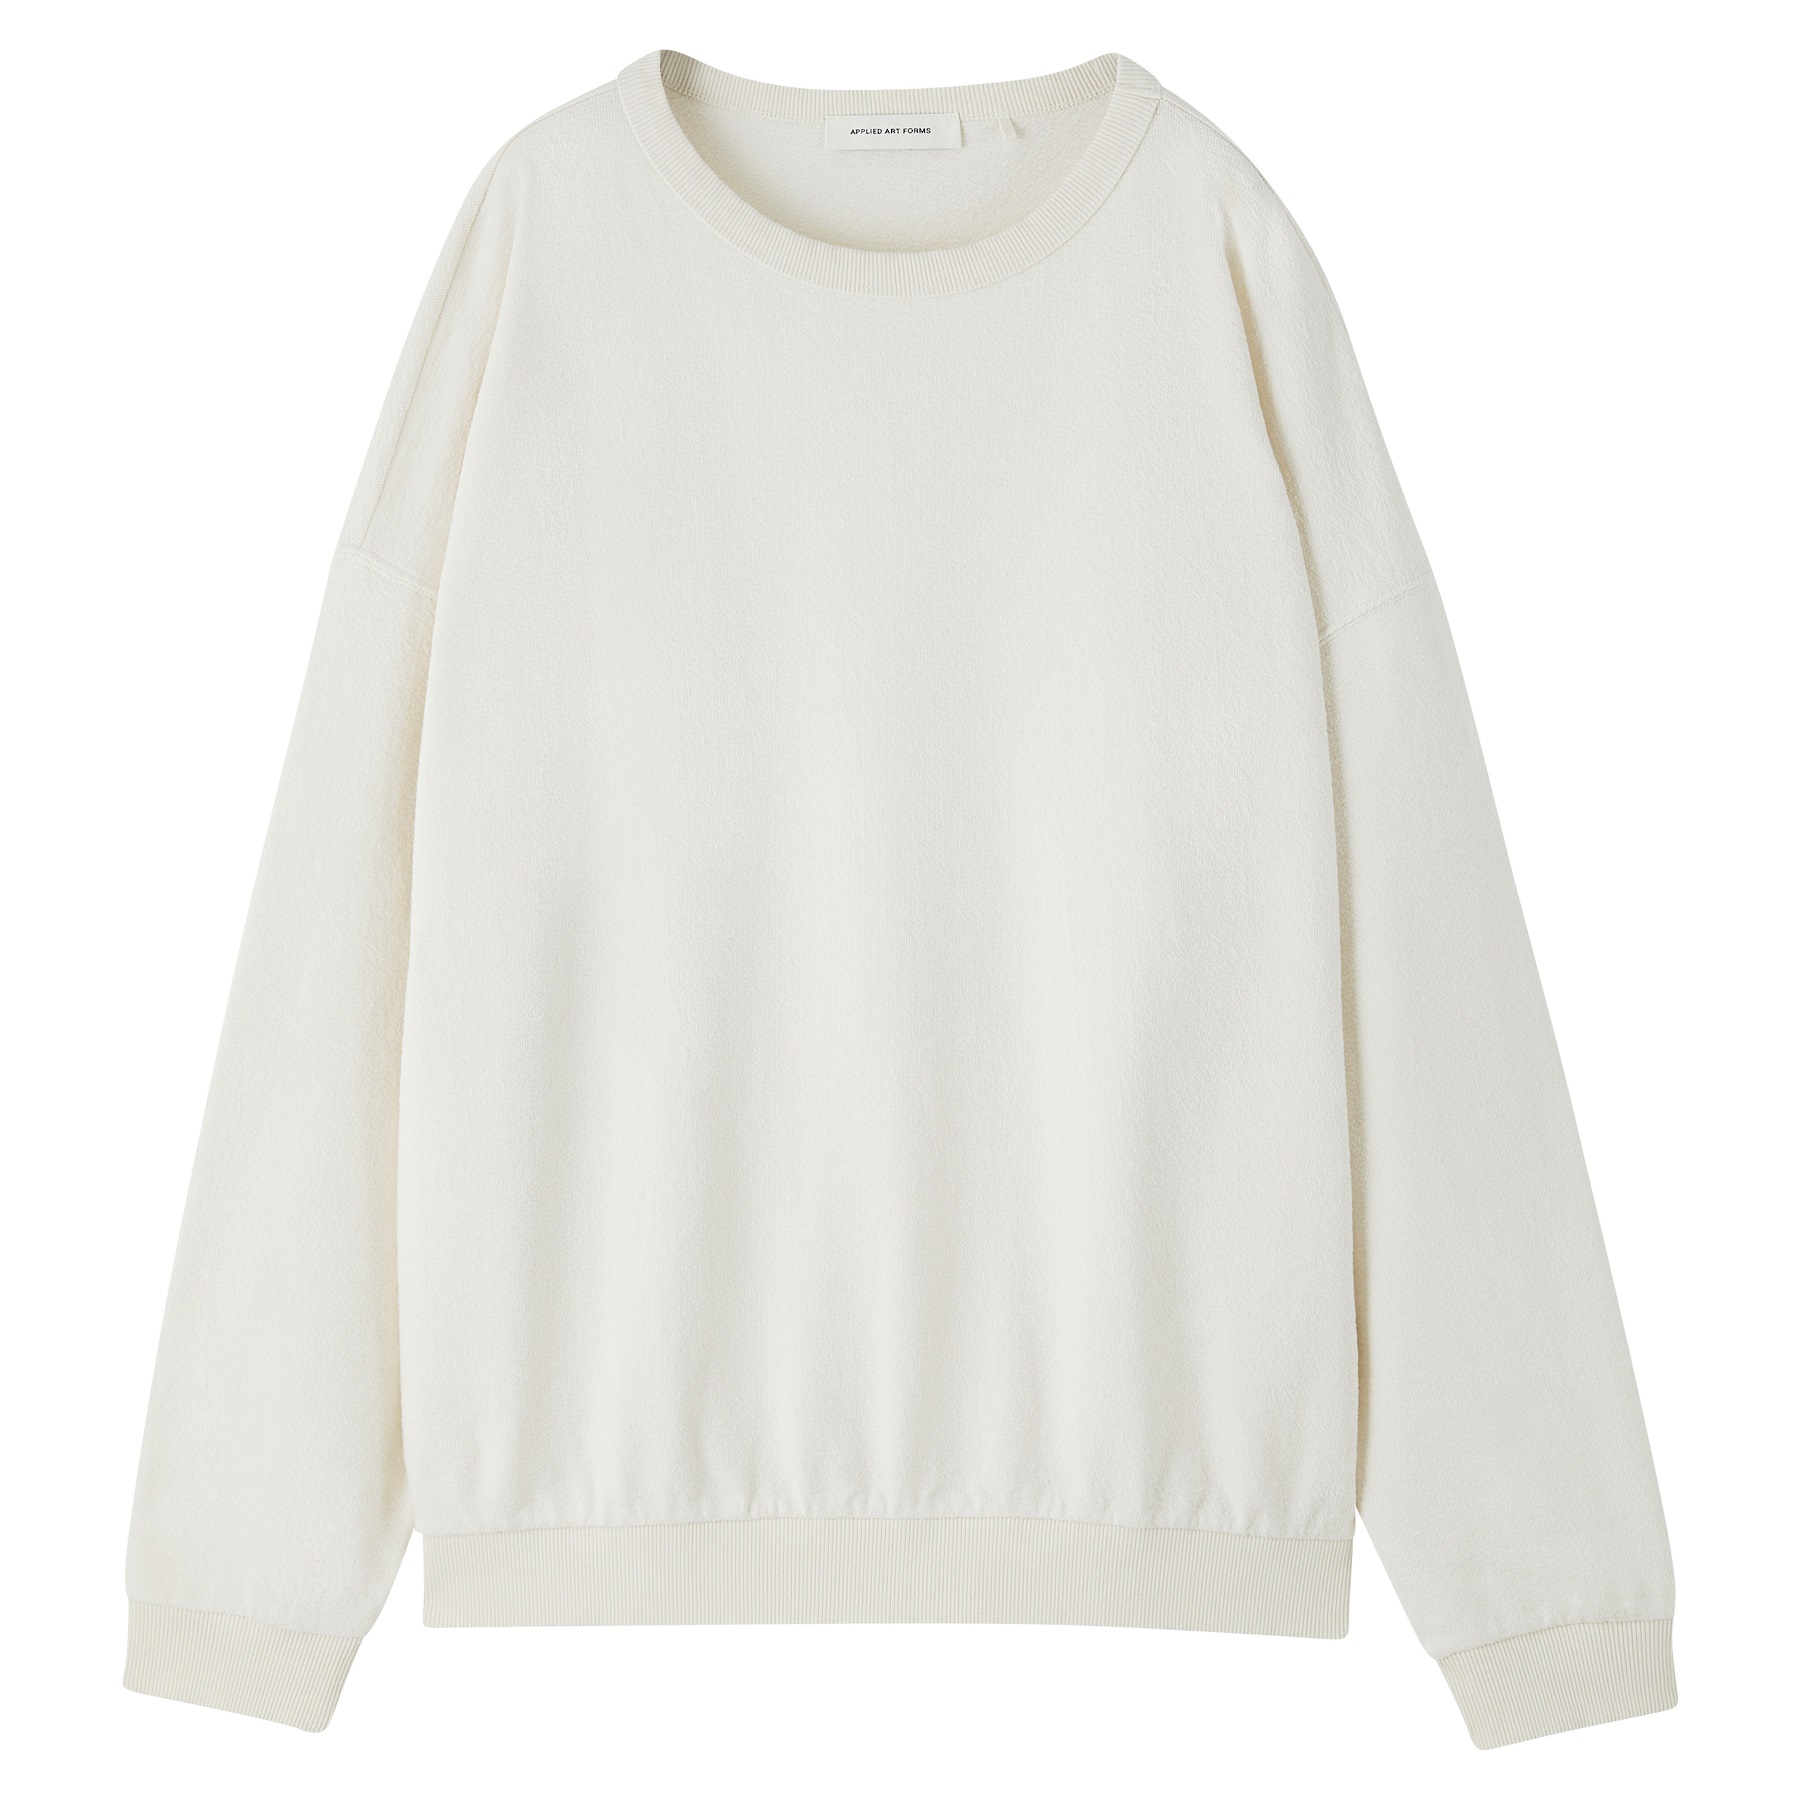 APPLIED ART FORMS Structure Sweater in Ecru S